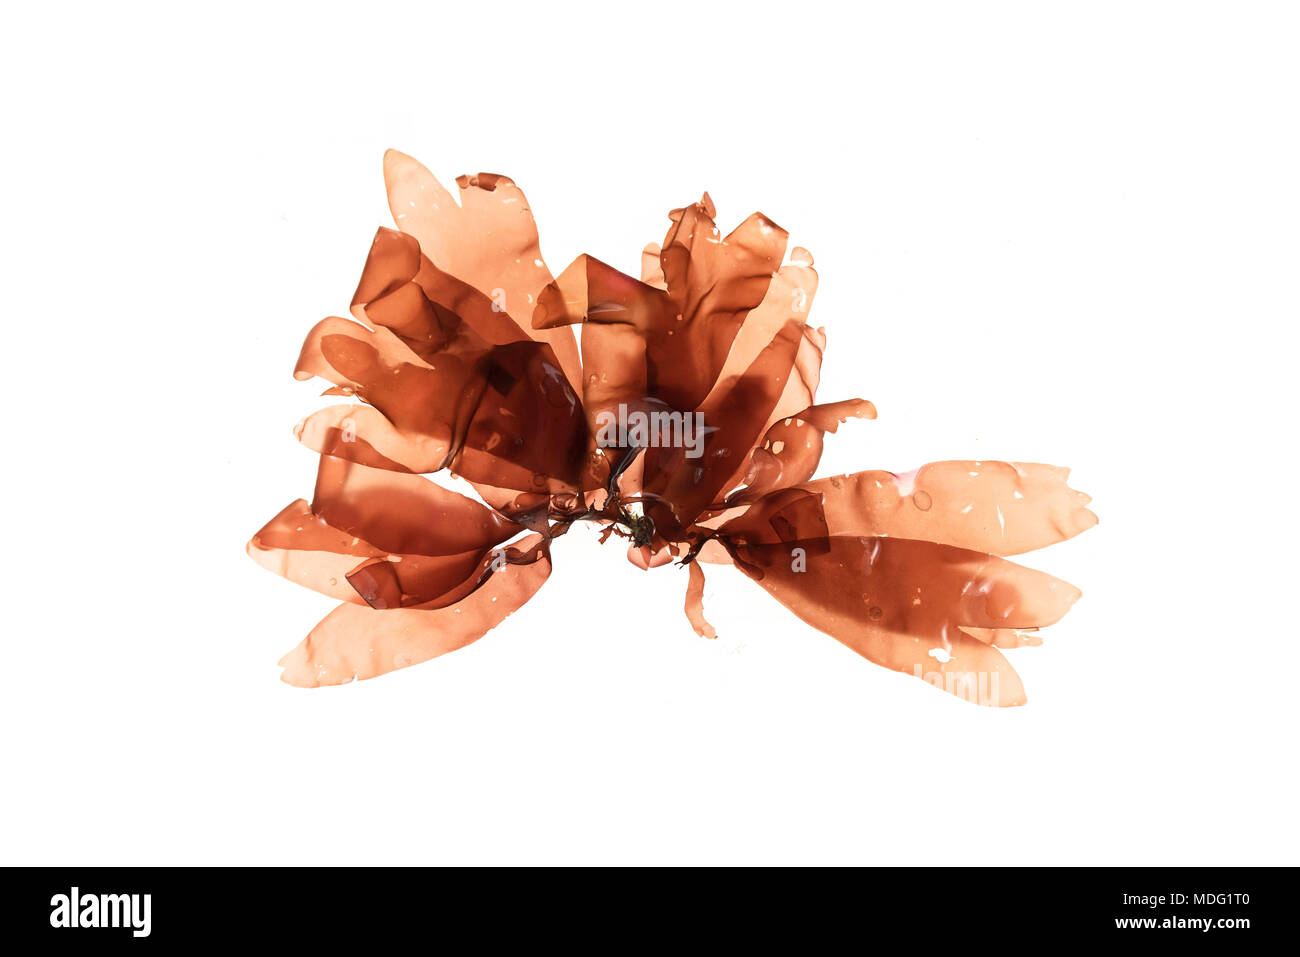 Dulse (Palmaria palmata) floating in water, lit from behind on a white background Stock Photo